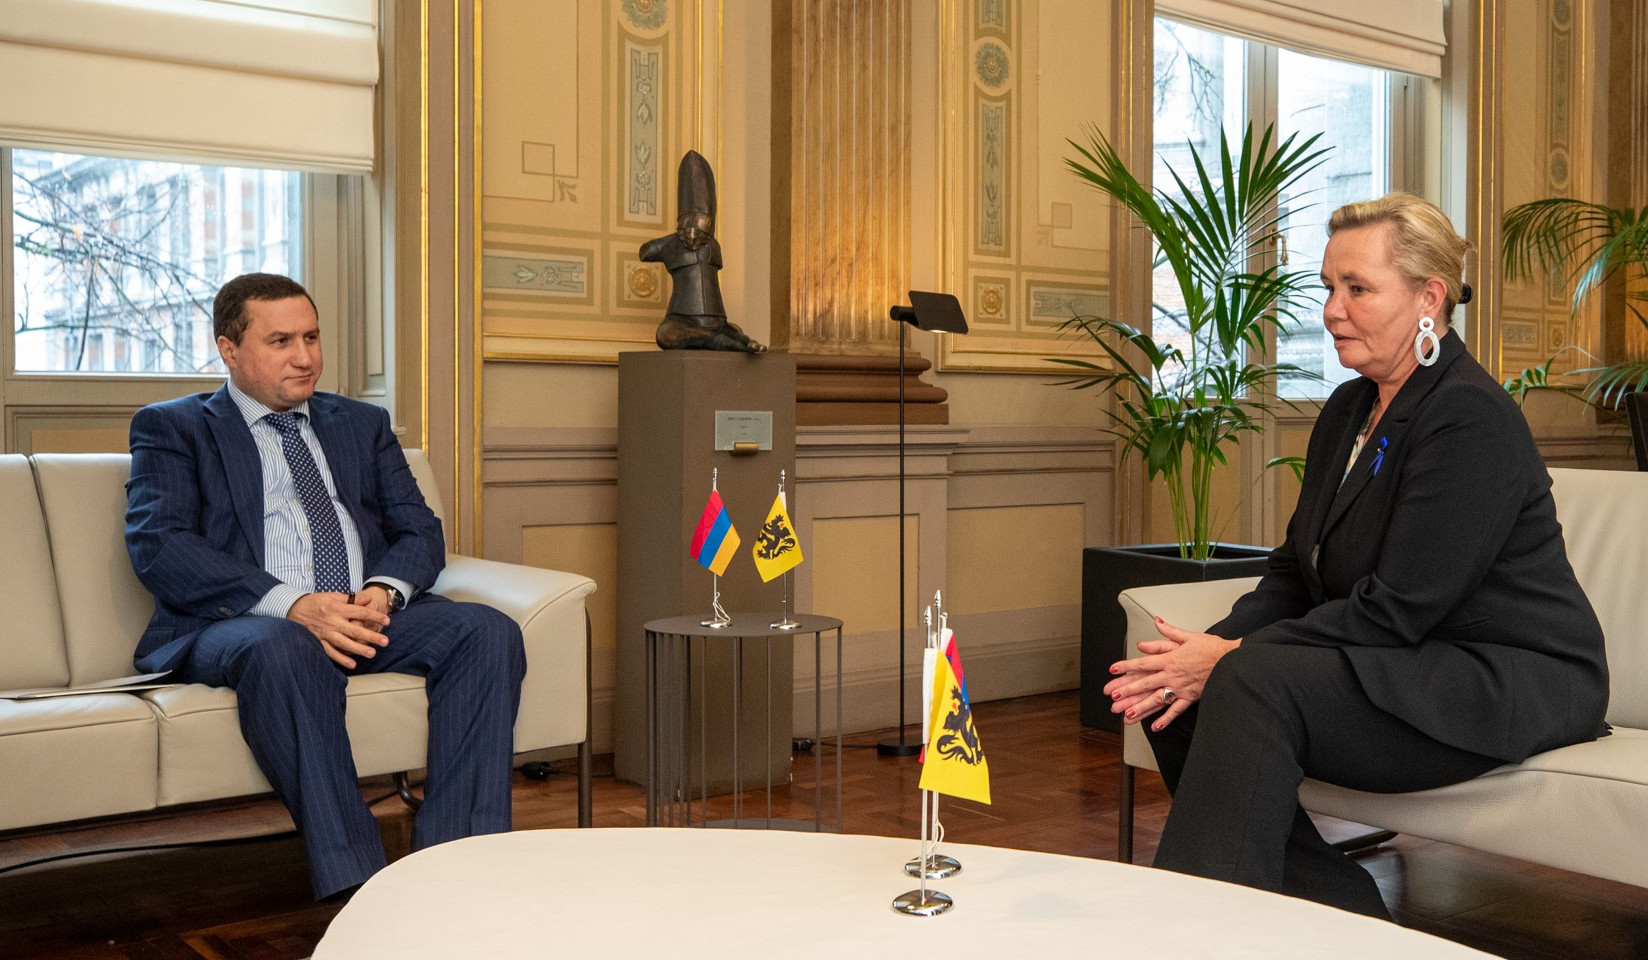 Meeting between Ambassador of Armenia to Brussels and Chair of Flemish Parliament